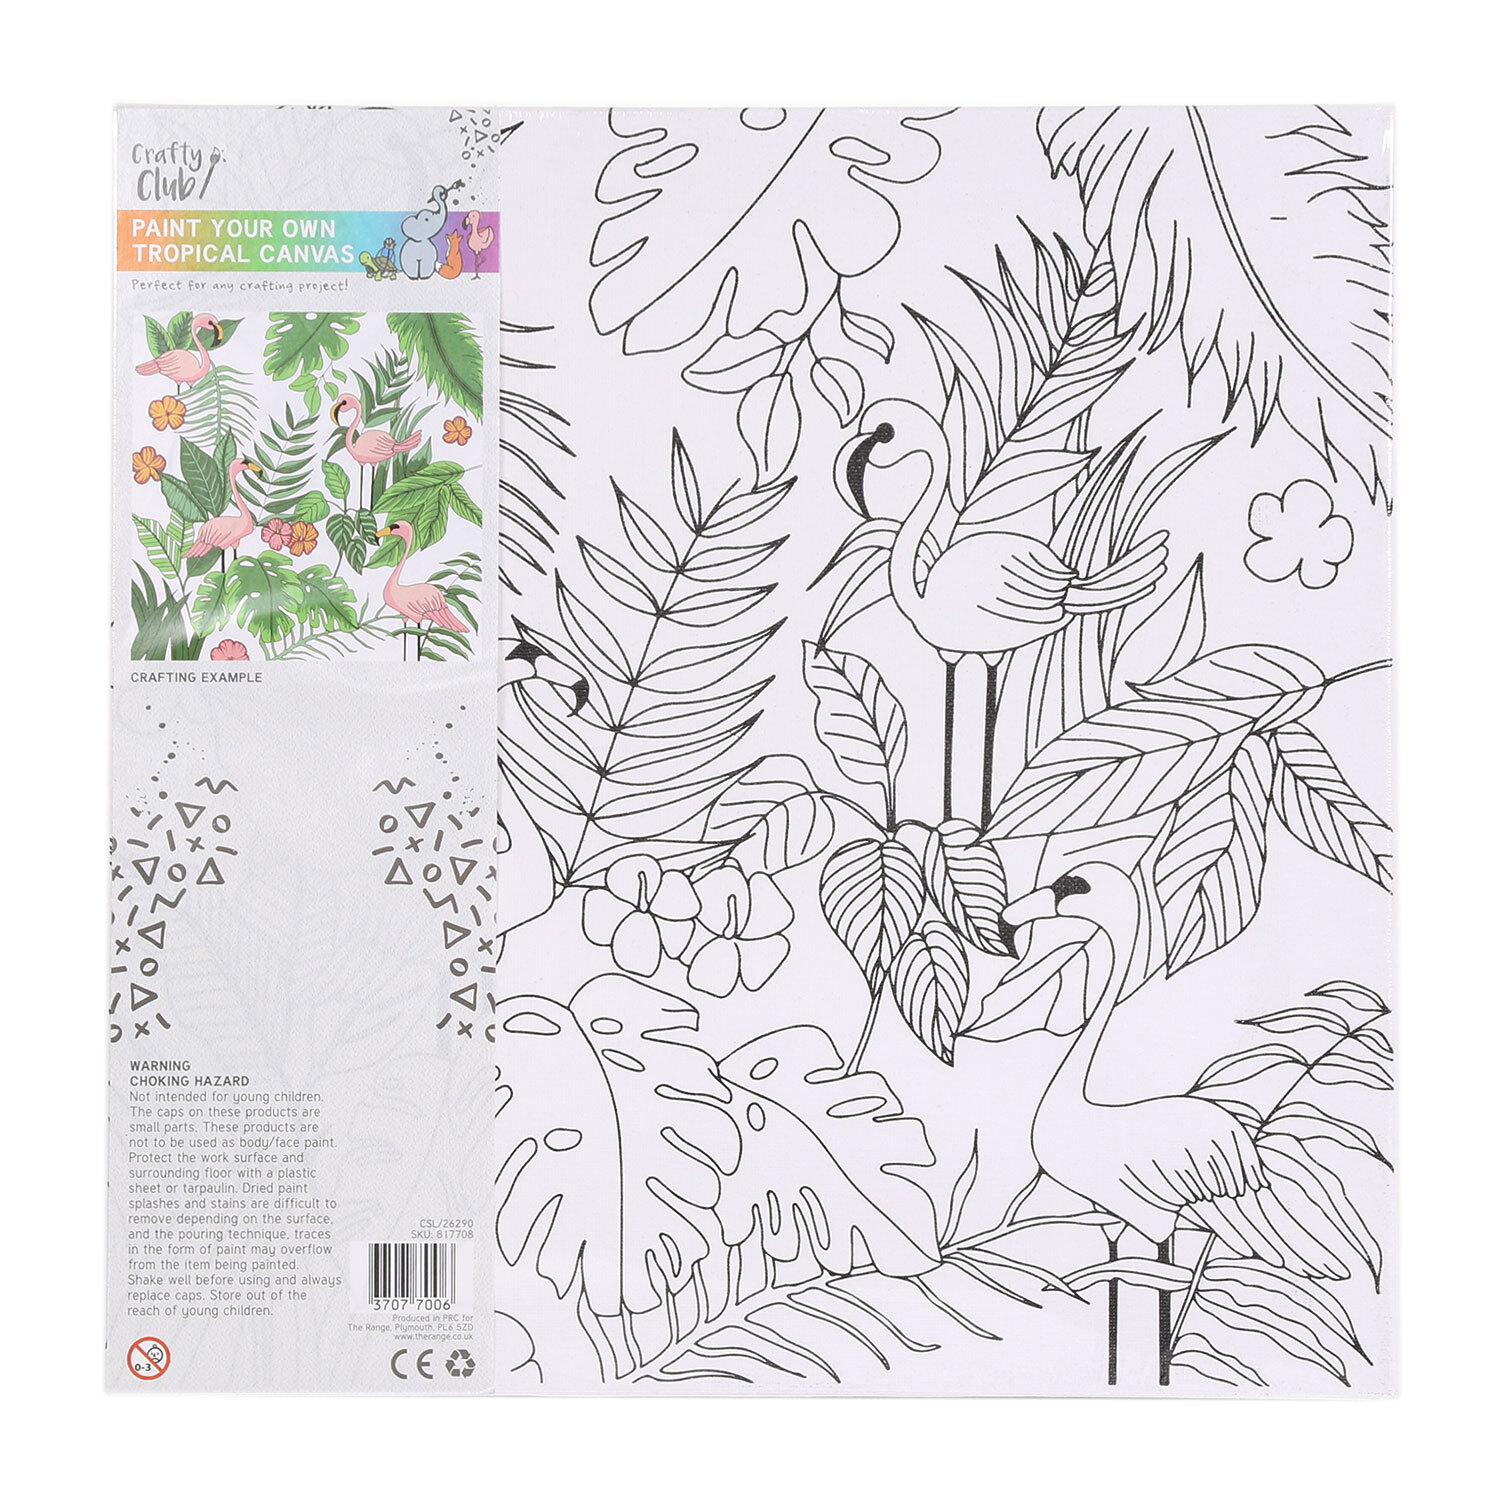 Crafty Club Paint Your Own Tropical Canvas Kit Image